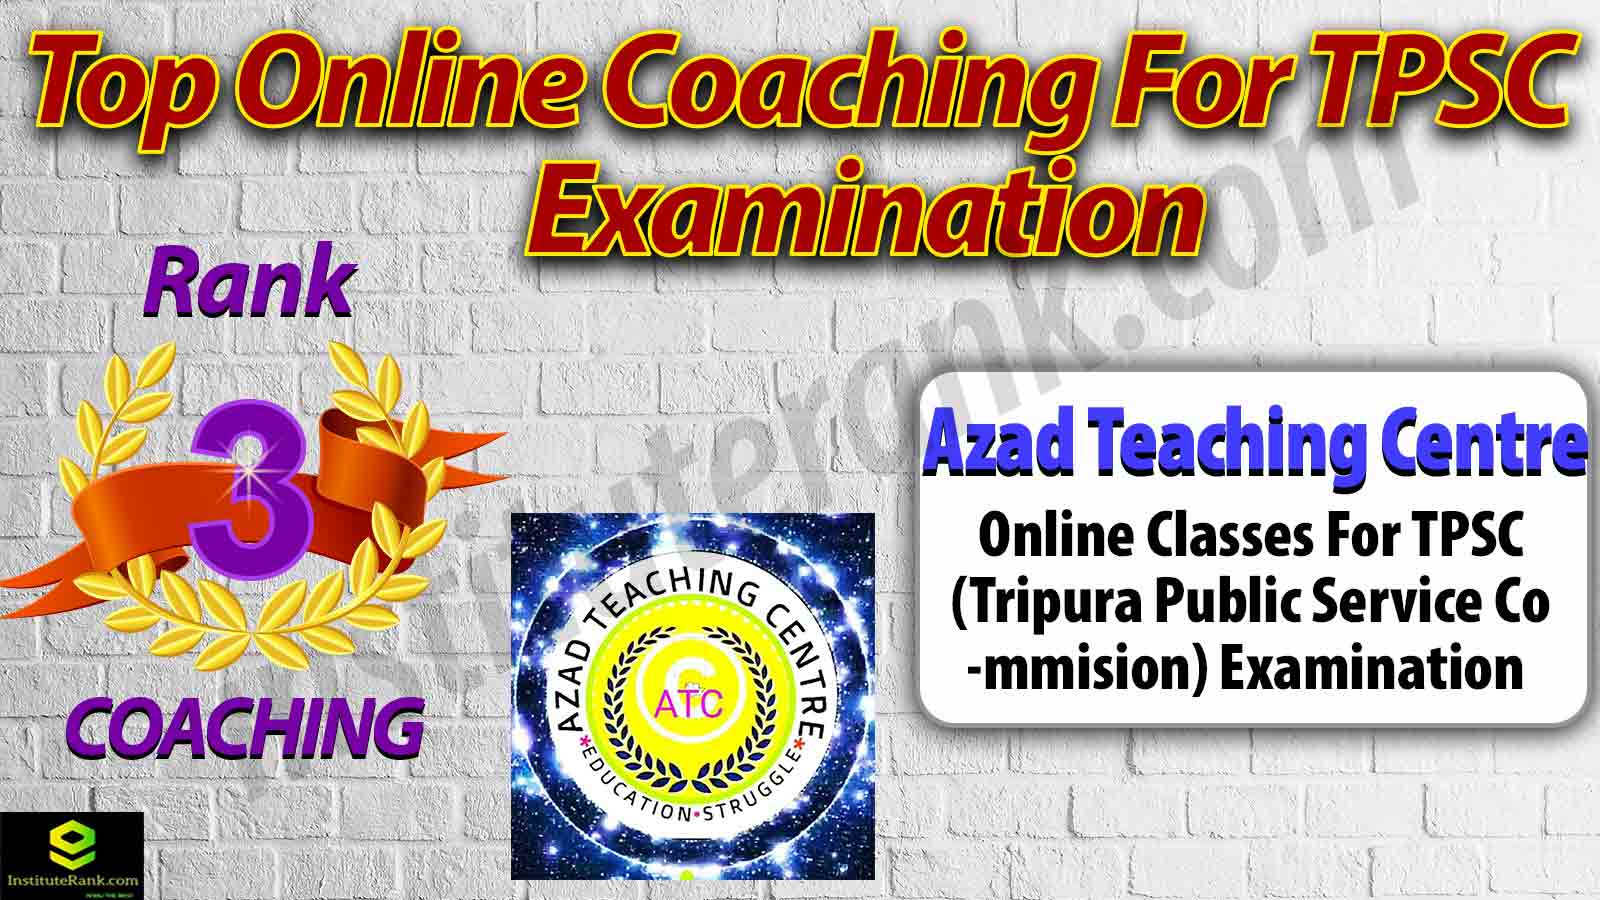 Top Online Coaching for TPSC Examination